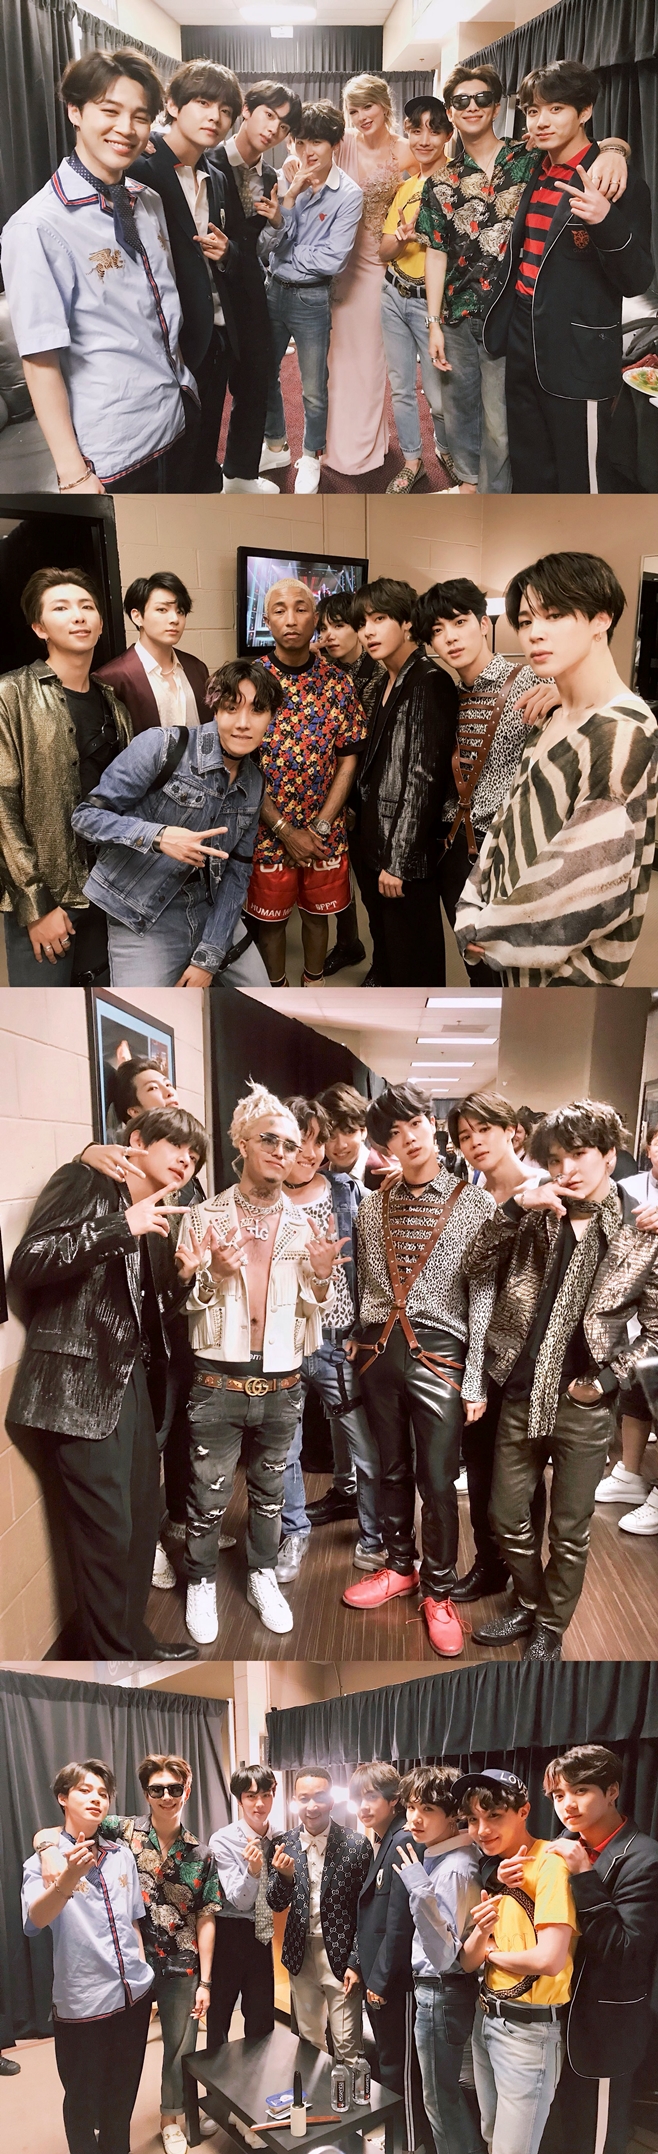 Group BTS flaunted their networking with World stars who attended the Billboards Music Awards together.The 2018 Billboards Music Awards were held at the MGM Grand Garden Arena in Las Vegas on the morning of the 21st (Korea time).On this day, BTS showed off its strength by winning the top social artist part for the second consecutive year at the 2018 Billboards Music Awards.Also, the comeback stage of the new song Fake Love released on the 18th was decorated on the Billboards stage and attracted the attention of the former World.BTS released a certification shot with singers attending the 2018 Billboards Music Awards on their Twitter after the Fake Love stage.James Taylor Society for Worldwide Interbank Financial Tel, John Legend, Perel Serena Williams, and Lylle Firm are all eye-catching.Meanwhile, in the 2018 Billboards Music Awards, Ariana Grande, Dua Lipa, Calli Clarkson, Sean Mendes, John Legend, Janet Jackson and Camilla Cabeyo set up a spectacular stage.